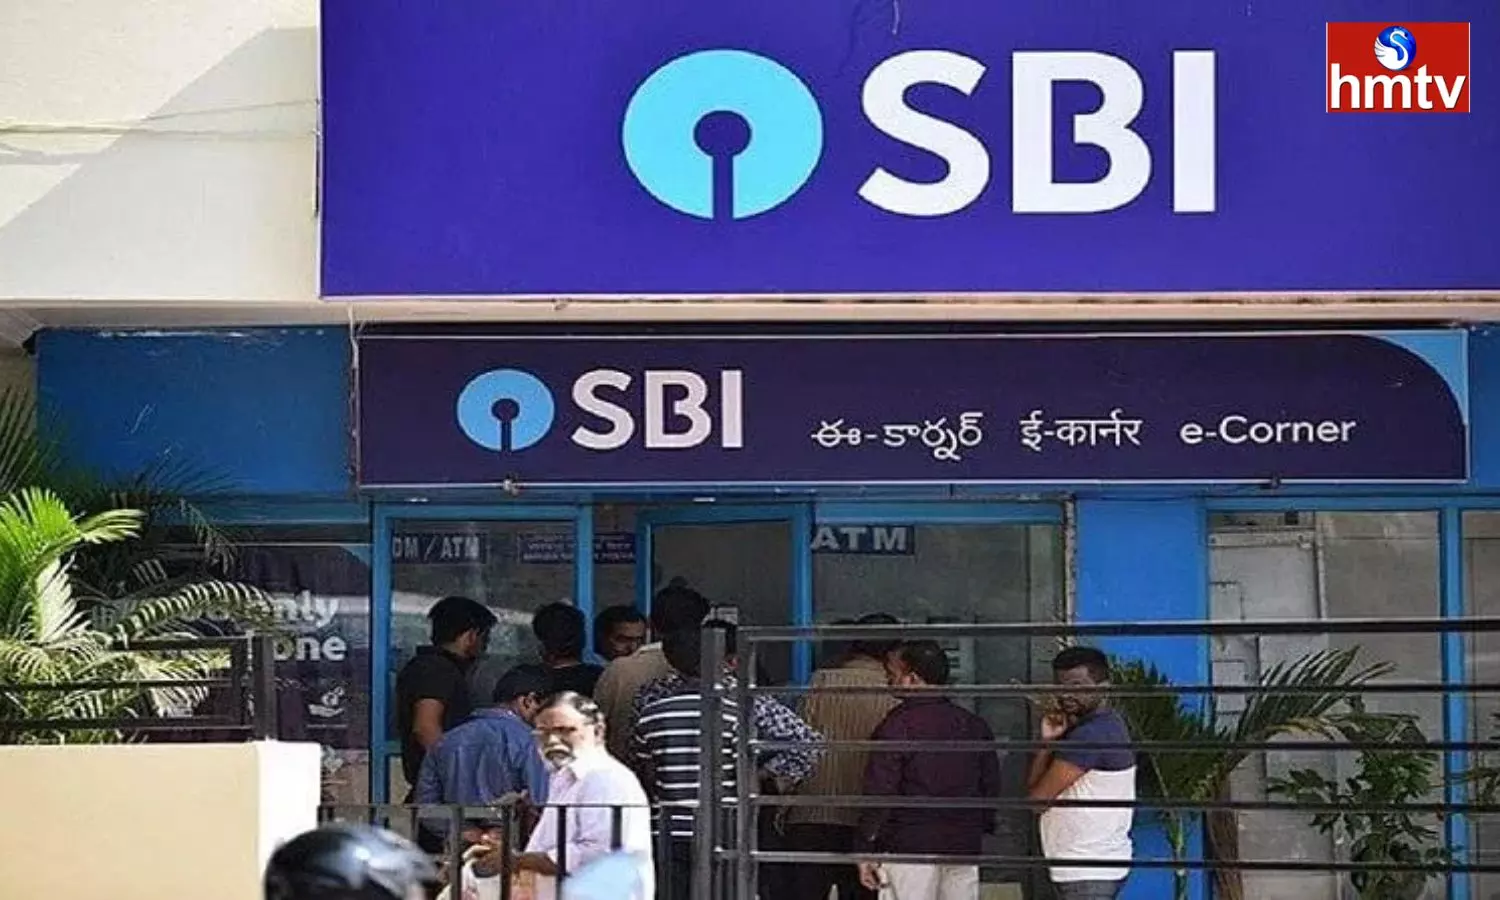 Alert to SBI customers debit card prices are increasing from April 1